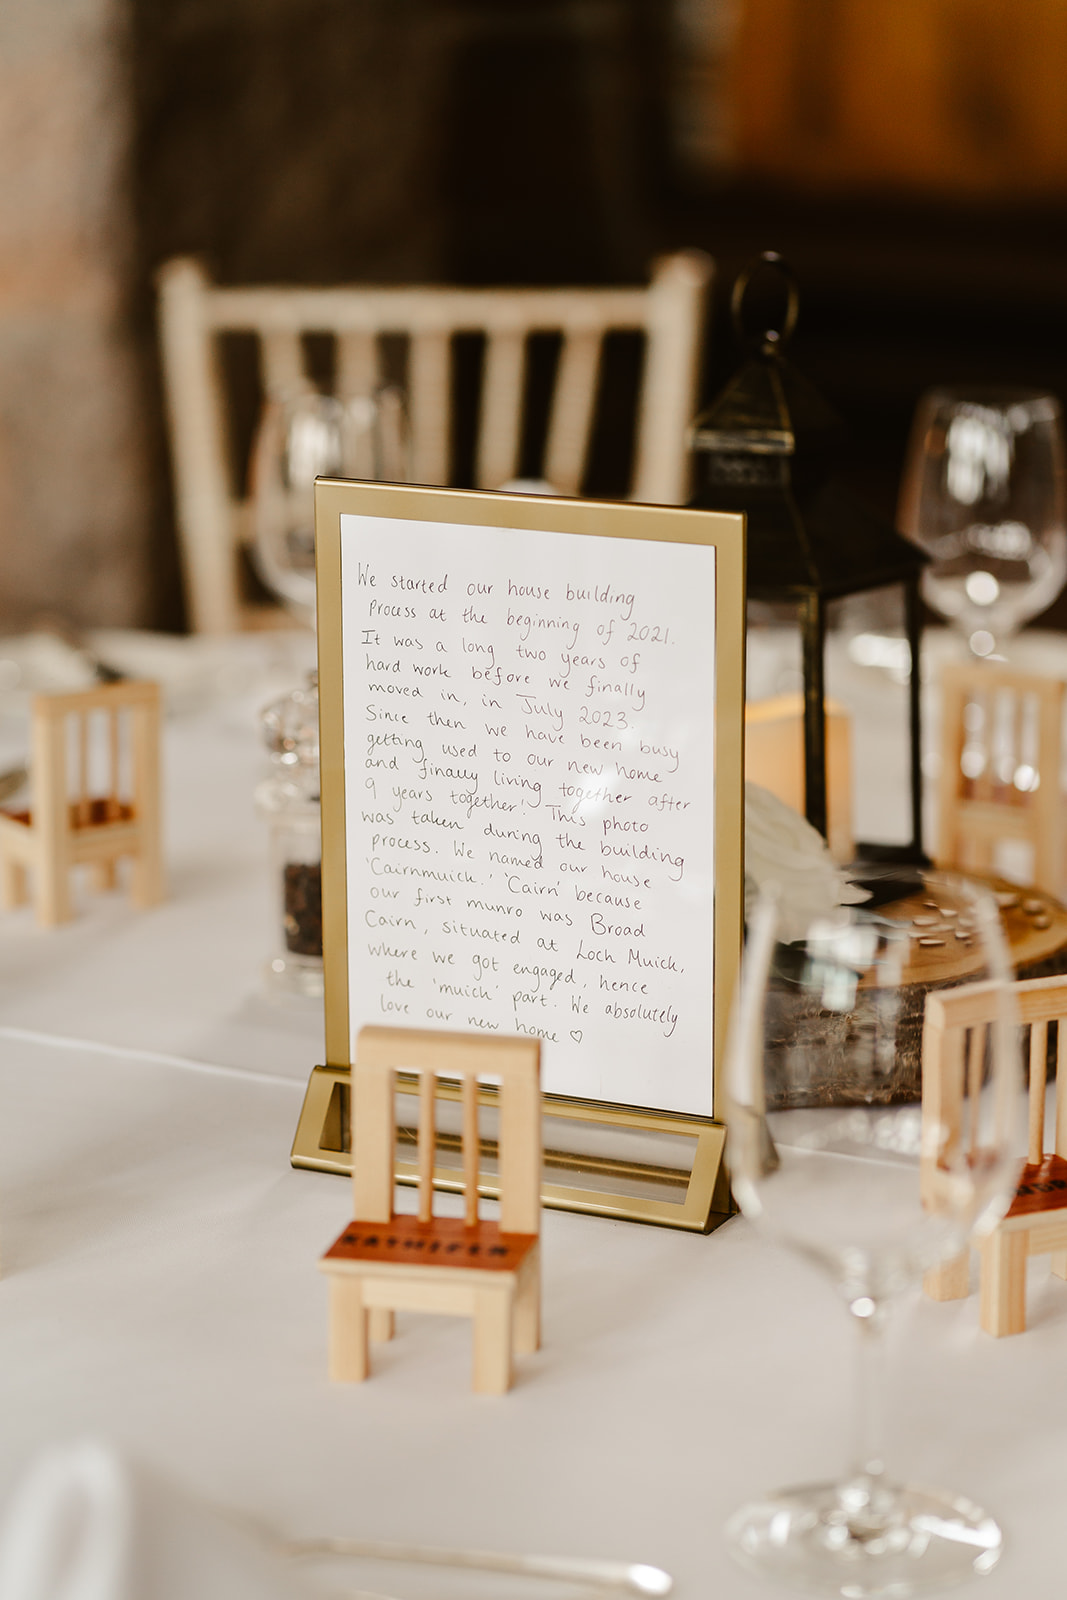 Personal details at wedding reception - there is an image with the meaning behind the image written on the back